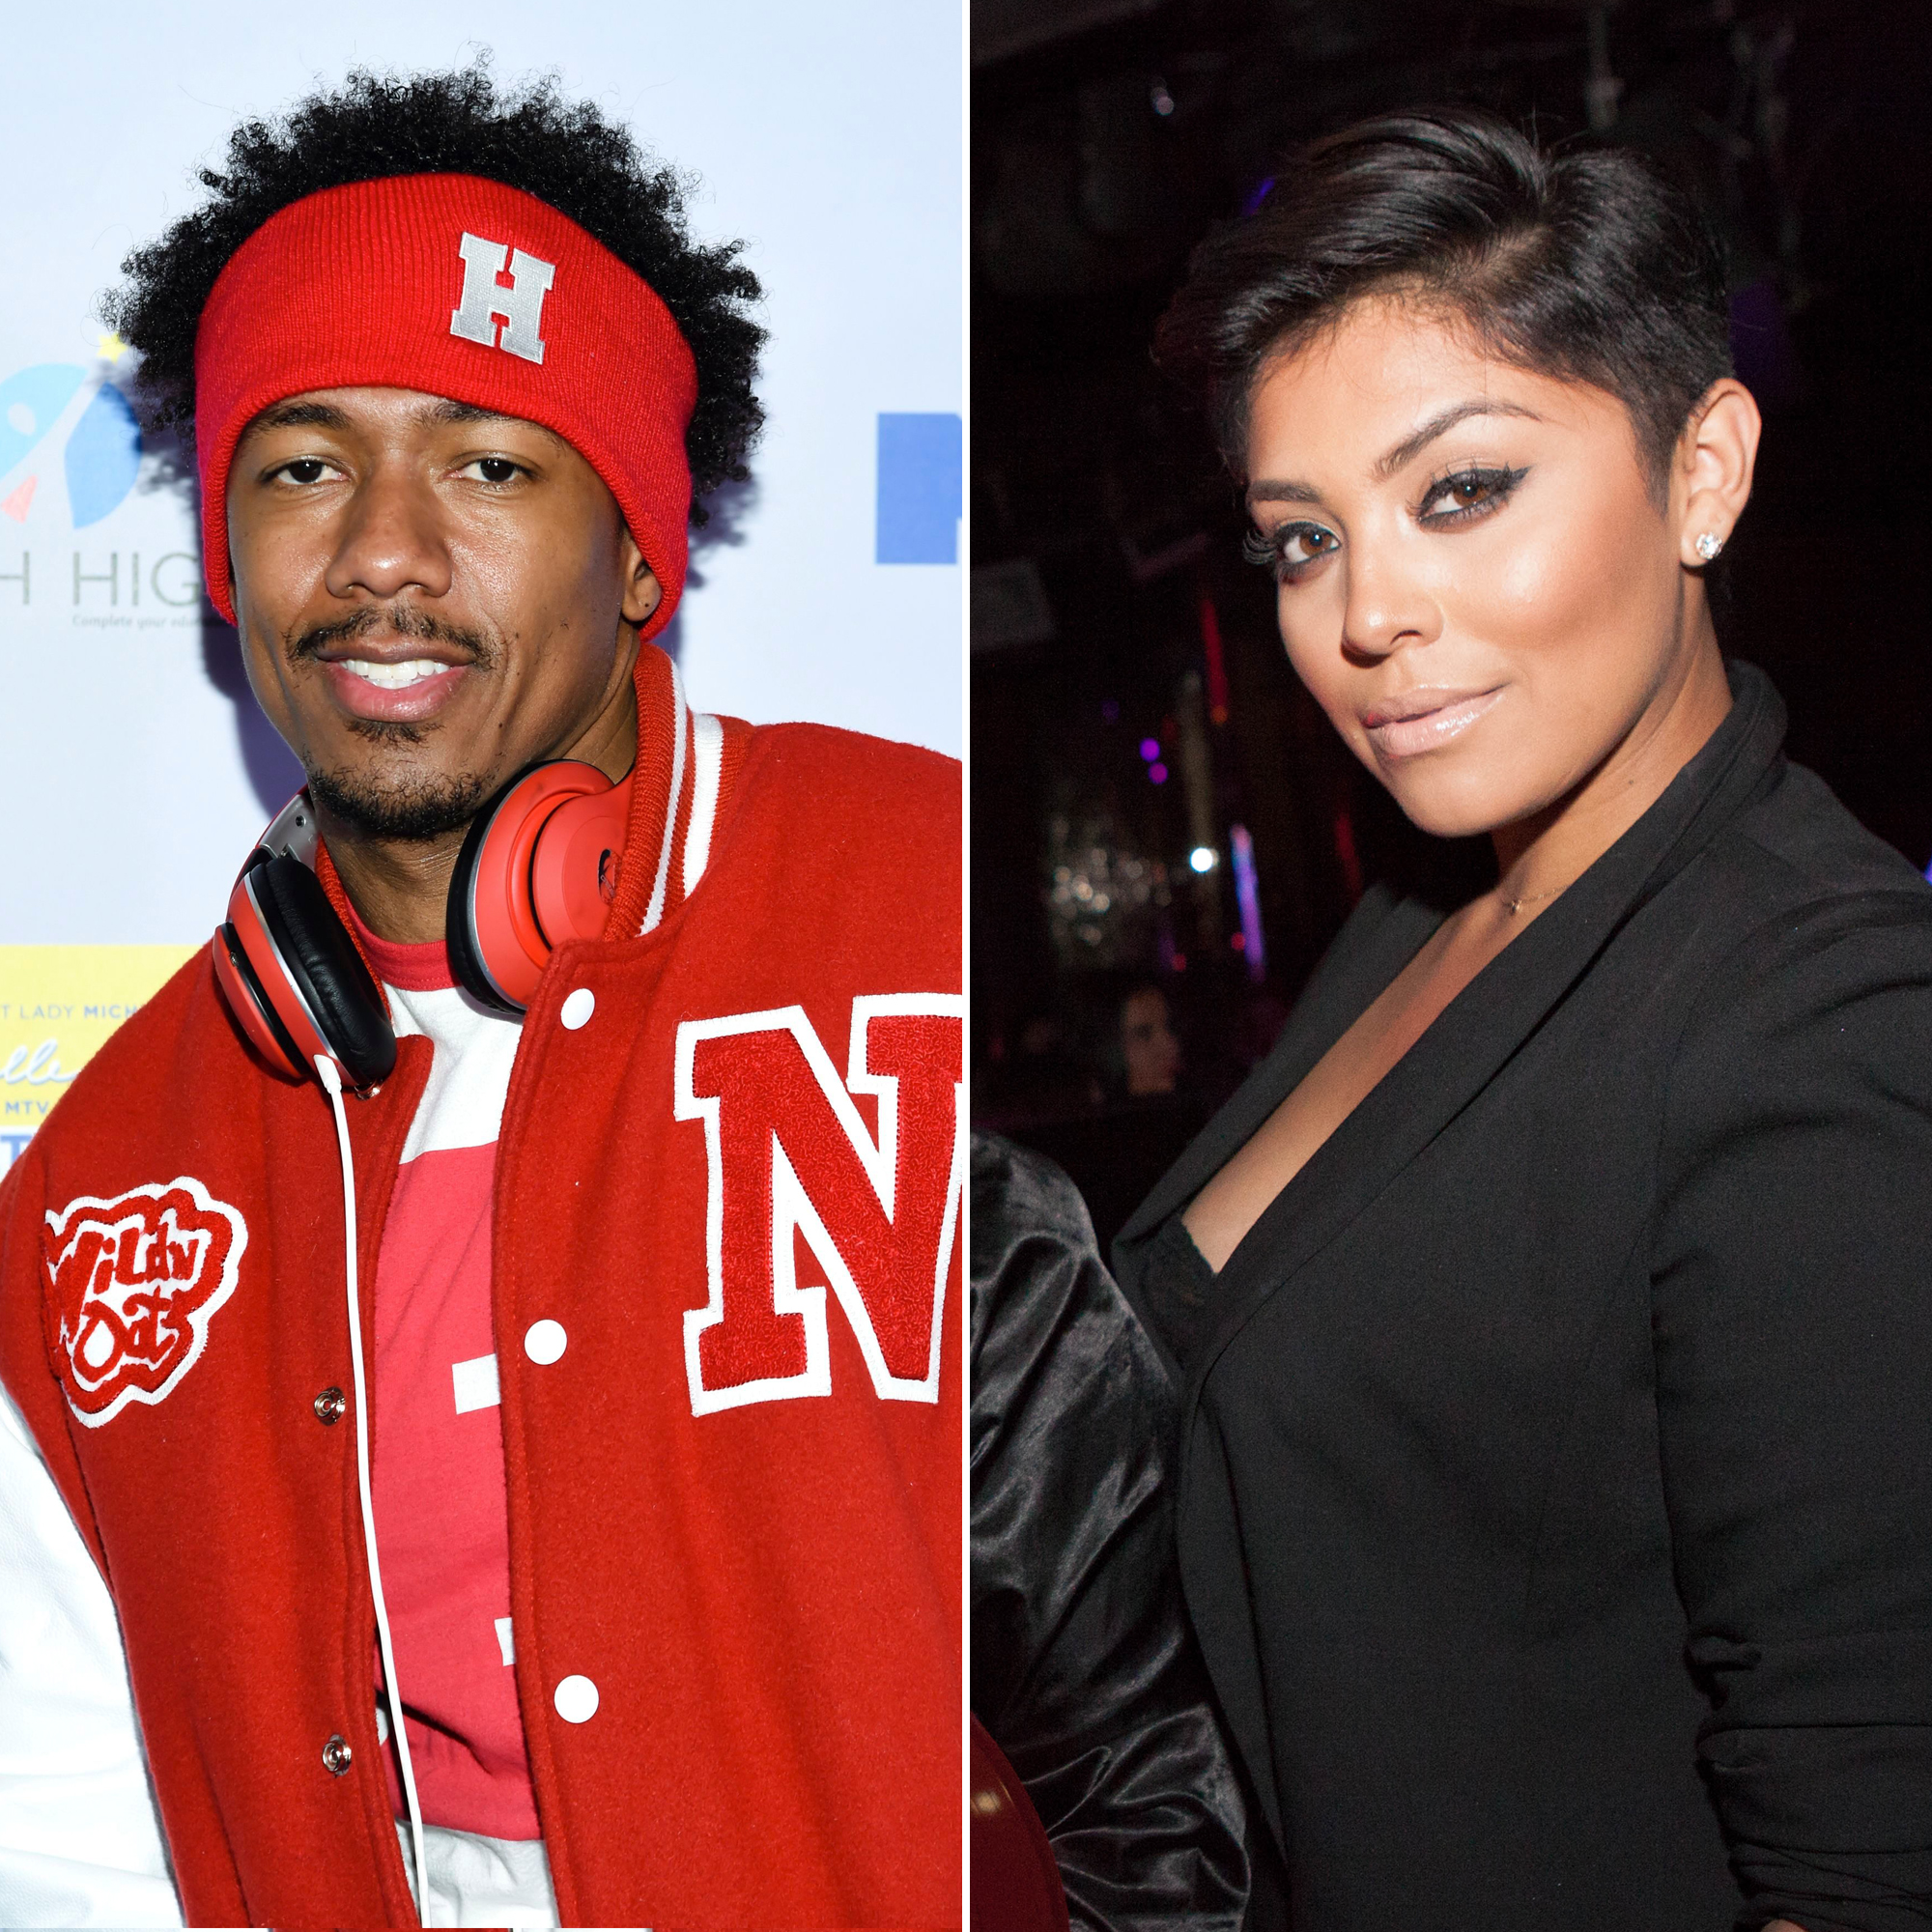 Dating who nick cannon Who Is